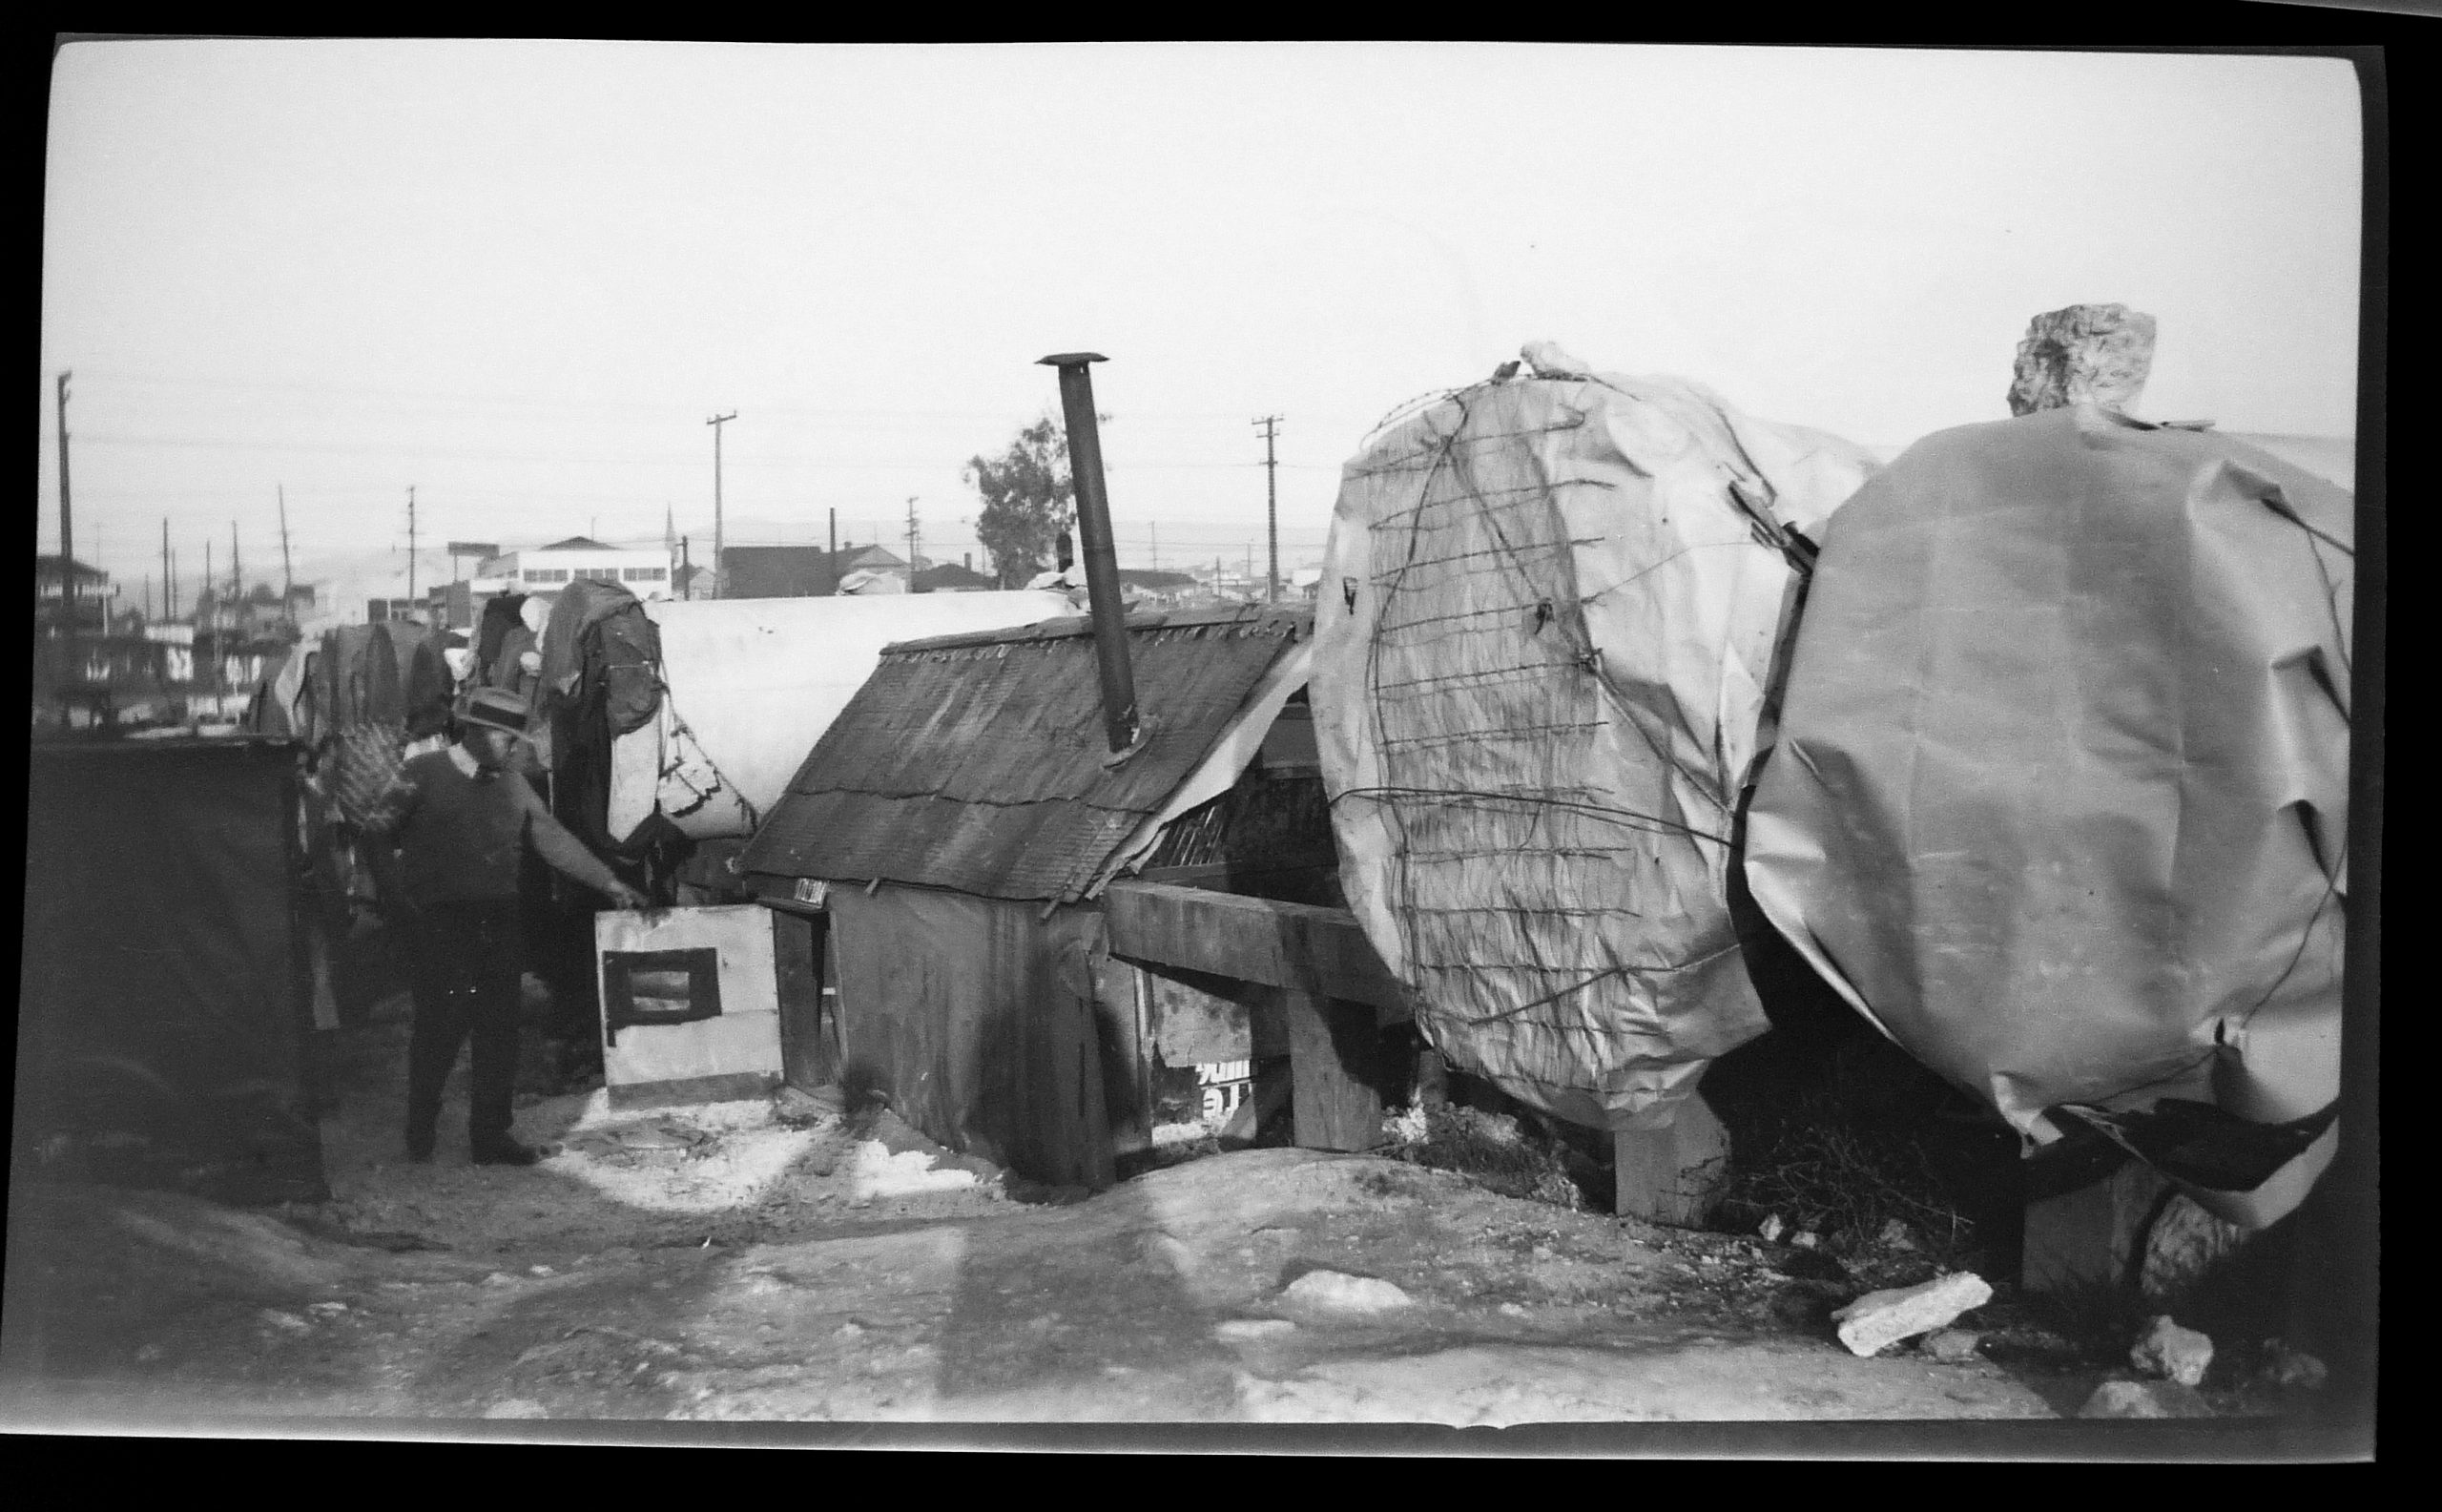 black and white image of tents set up in the early 1930s in Oakland, dubbed "Pipe City"